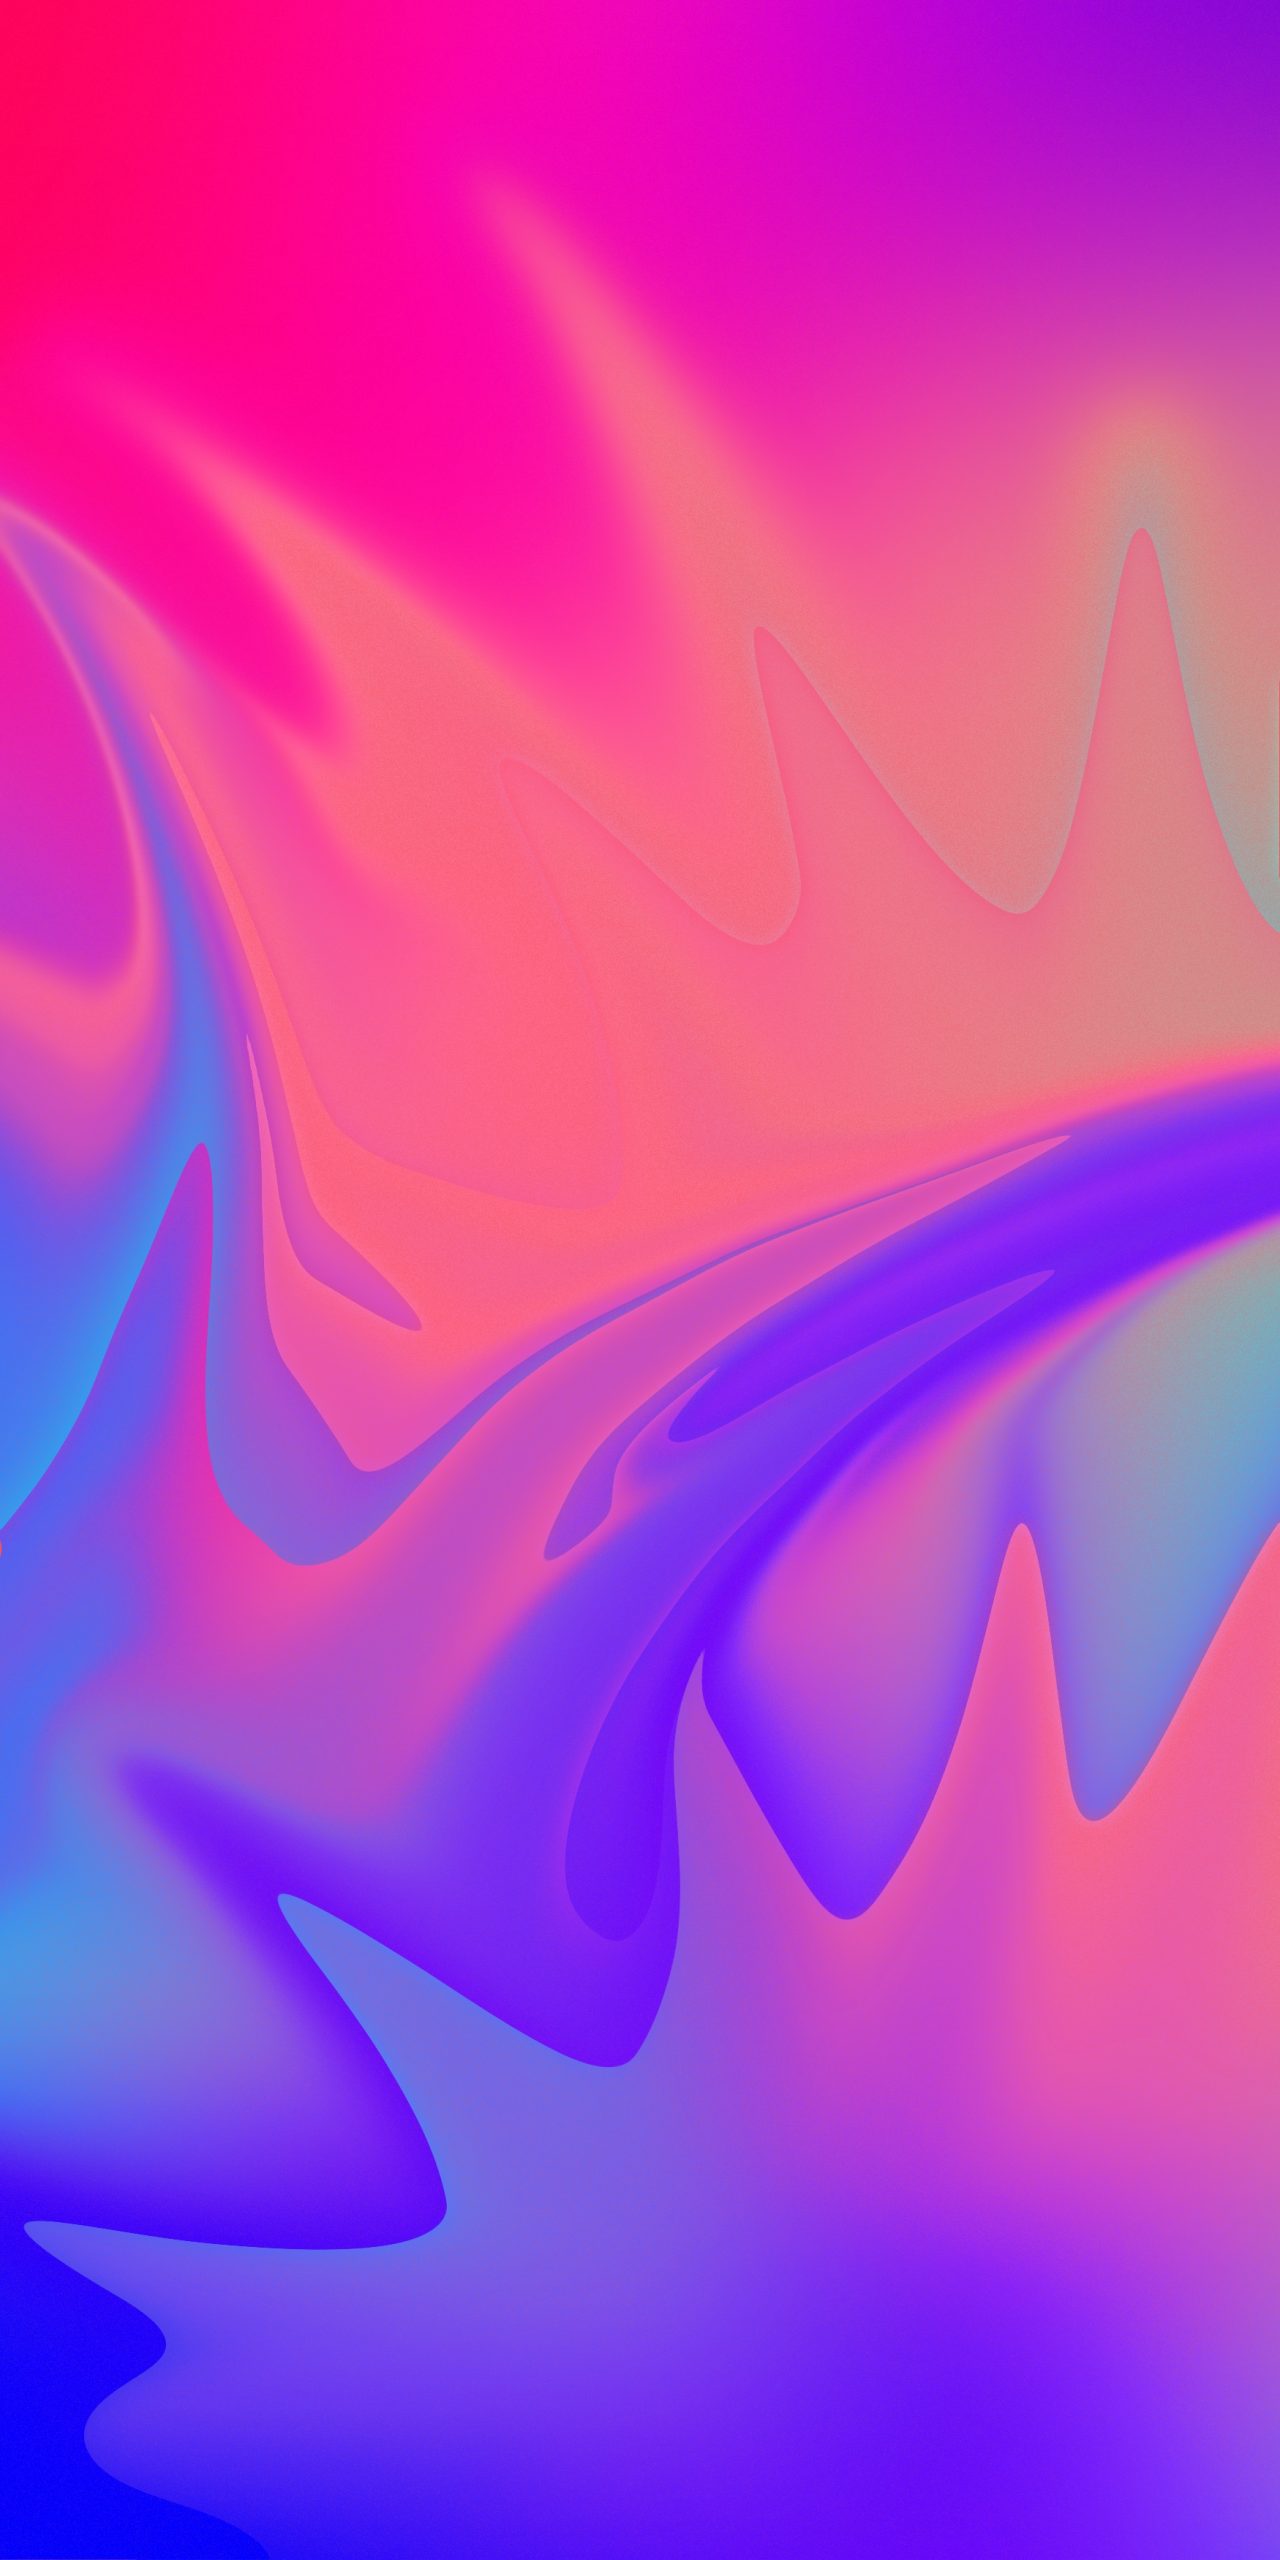 marbleized-iphone-wallpaper-pink-blue-purple-ongliong11